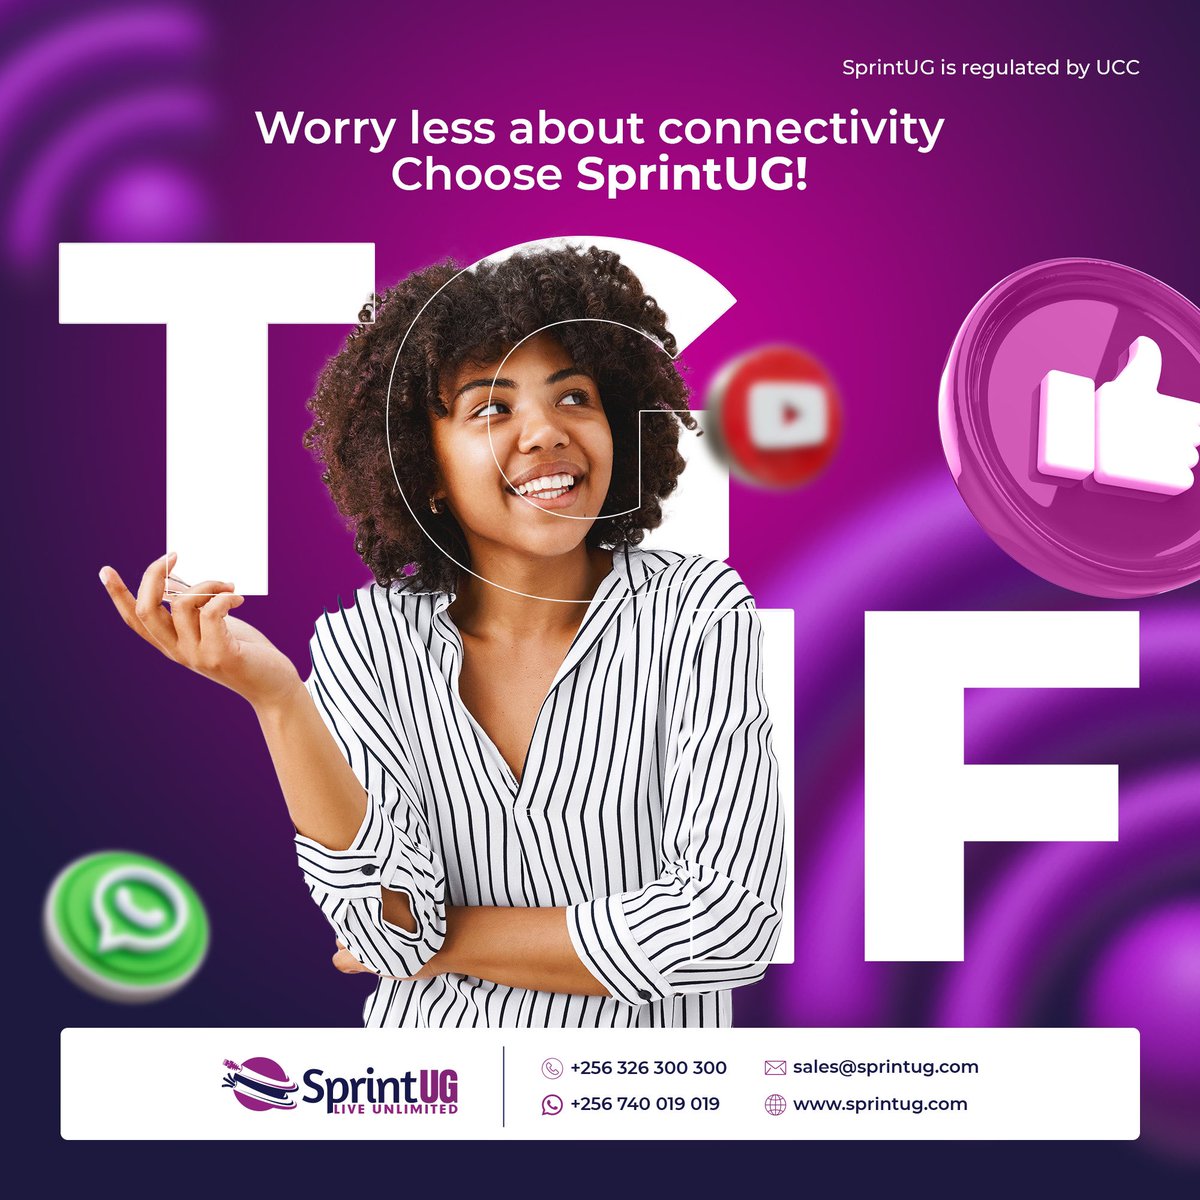 Stay connected with your loved ones with our home internet services 🤩 Unlimited binge watching and surfing when you choose any of our UNLIMITED internet packages! #LiveUnlimited #TGIF